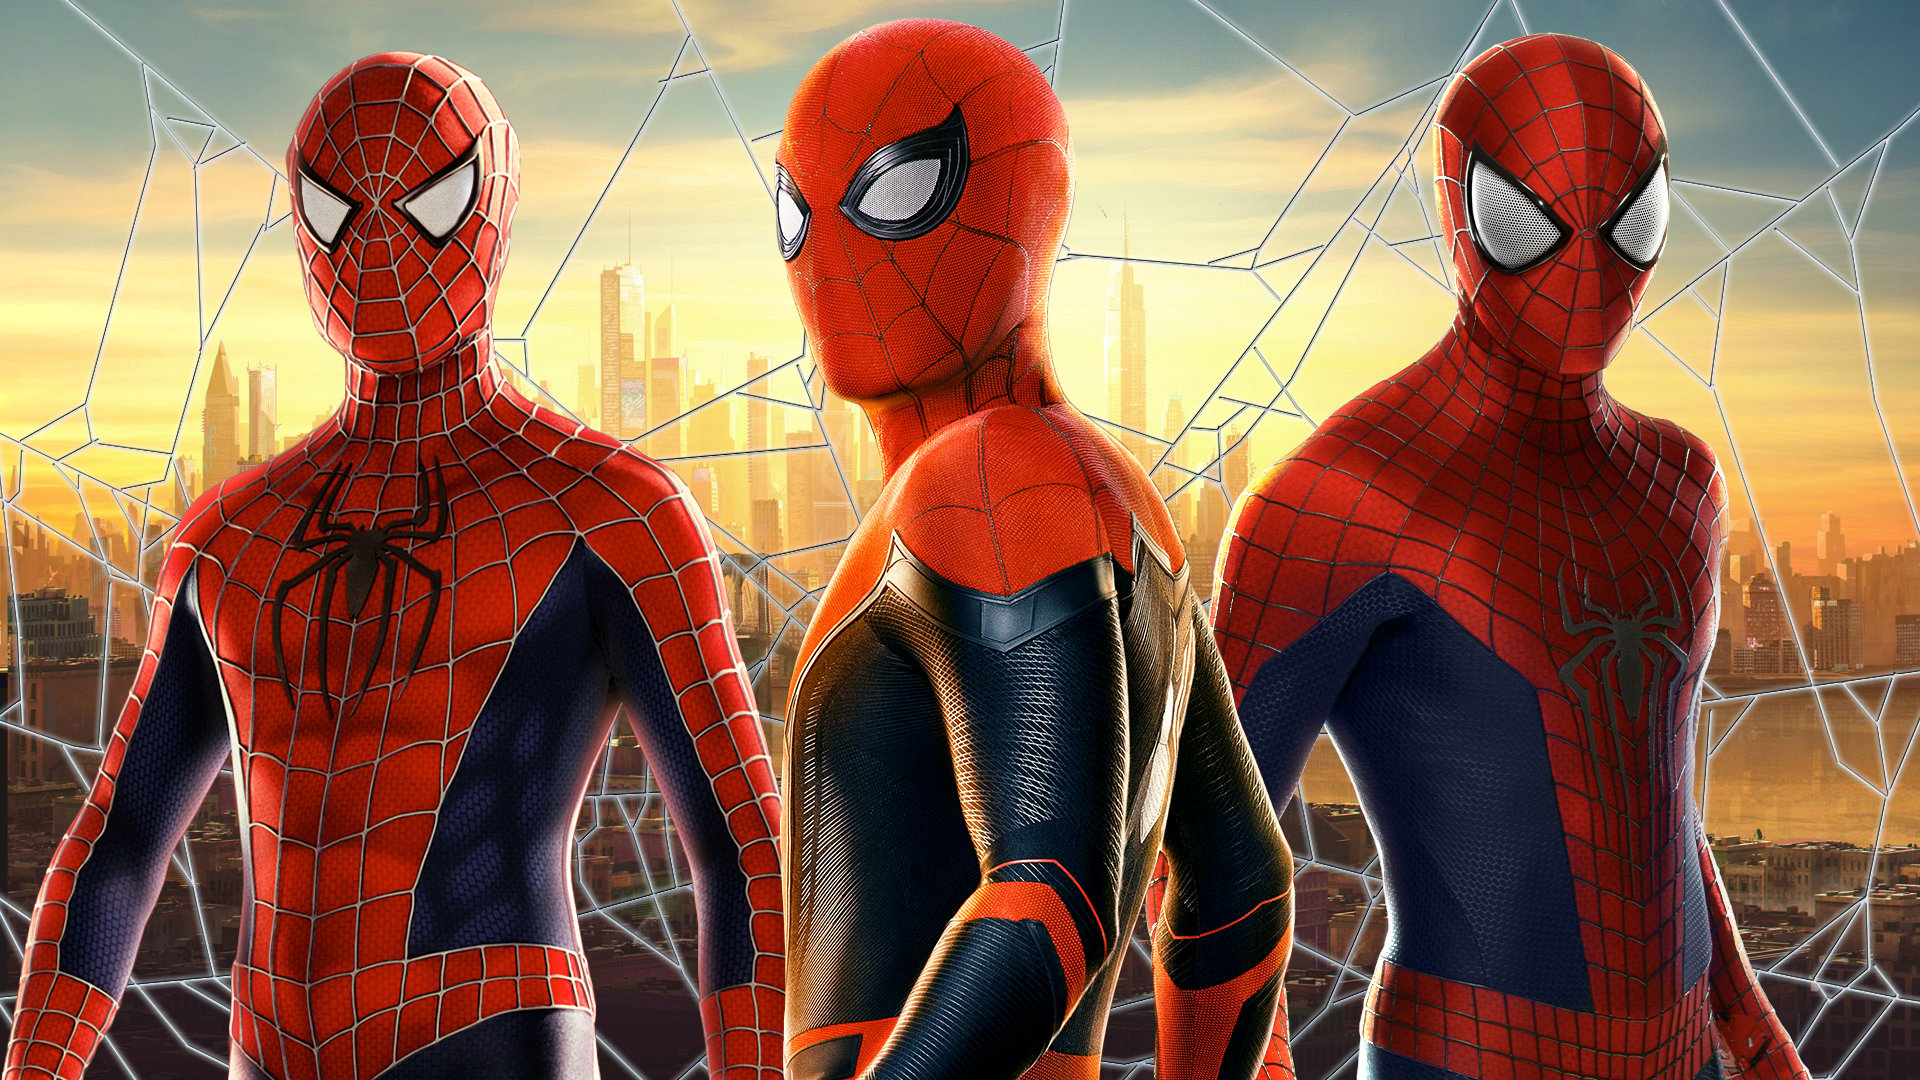 Pitching The Live Action Spider Verse's Multiverse